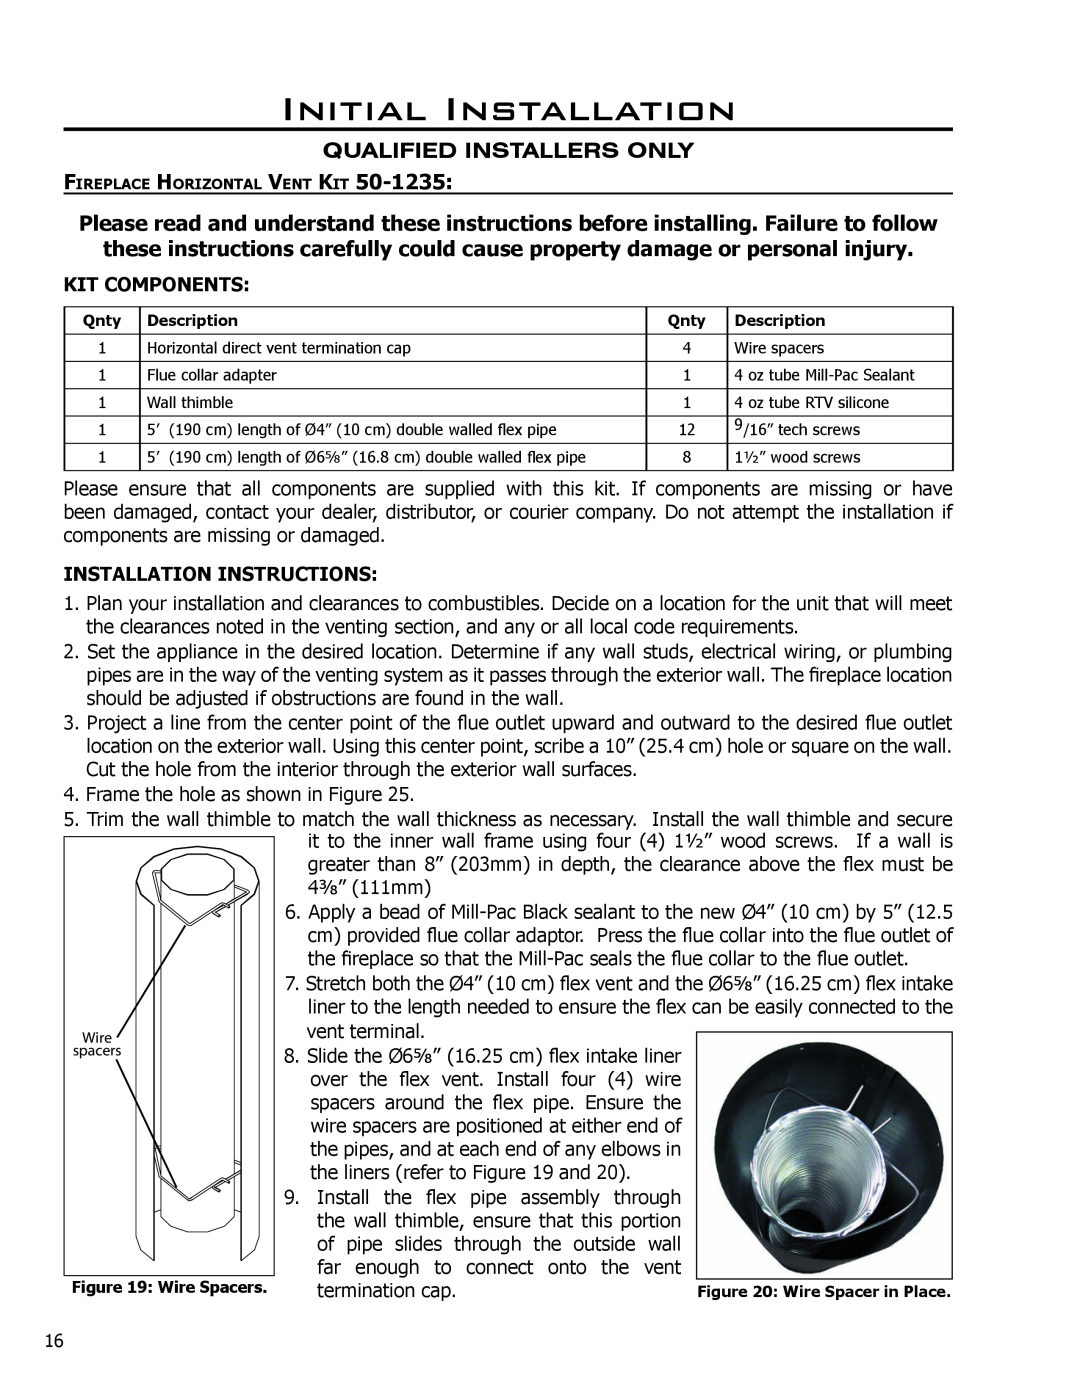 Enviro EG40-070 owner manual Kit Components, Installation Instructions, Initial Installation, Qualified Installers Only 